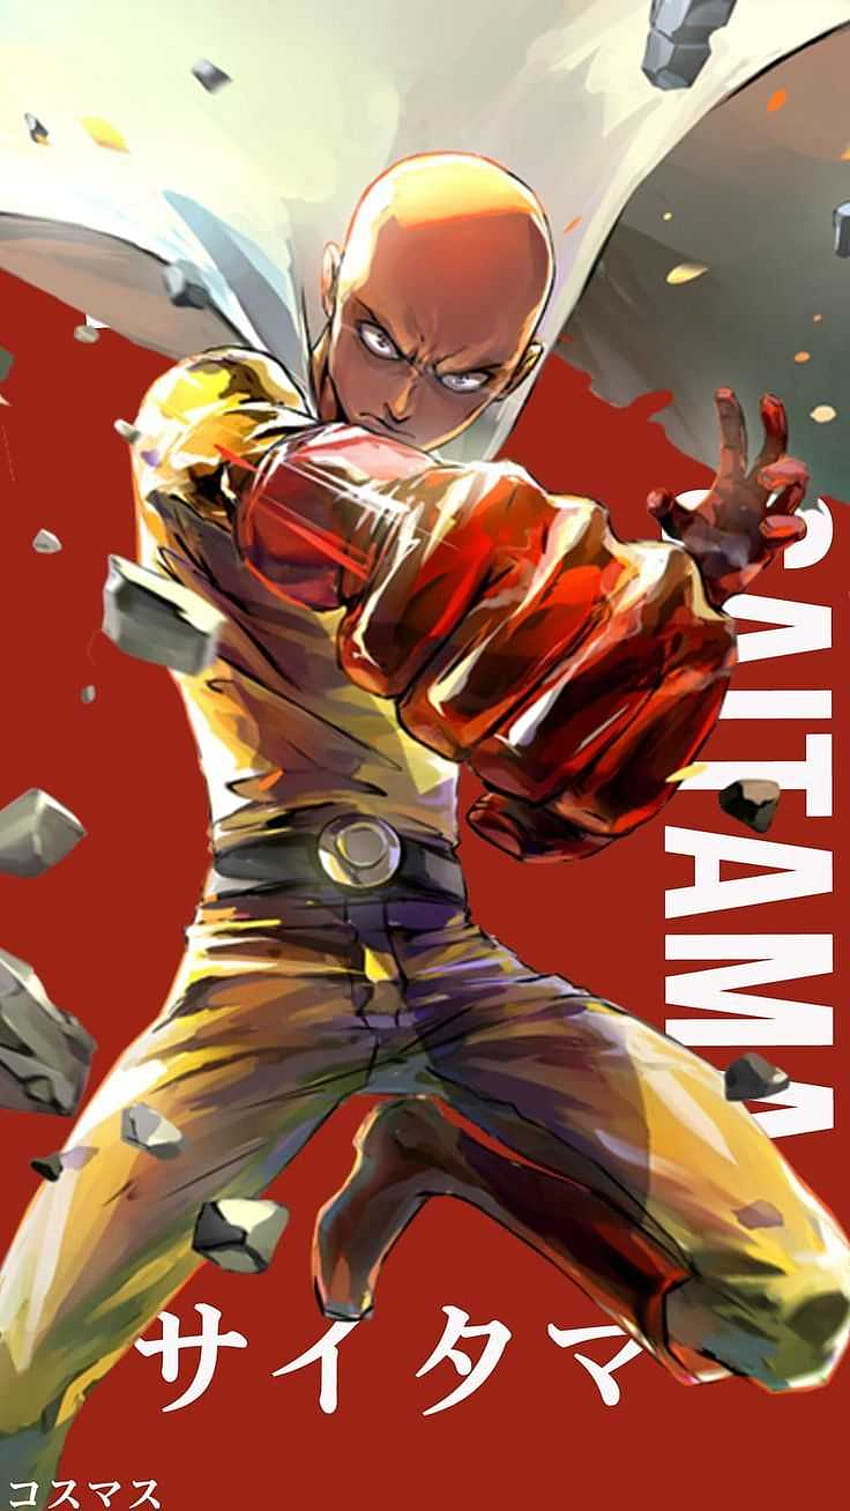 4 One Punch Man Phone, one punch man live HD phone wallpaper